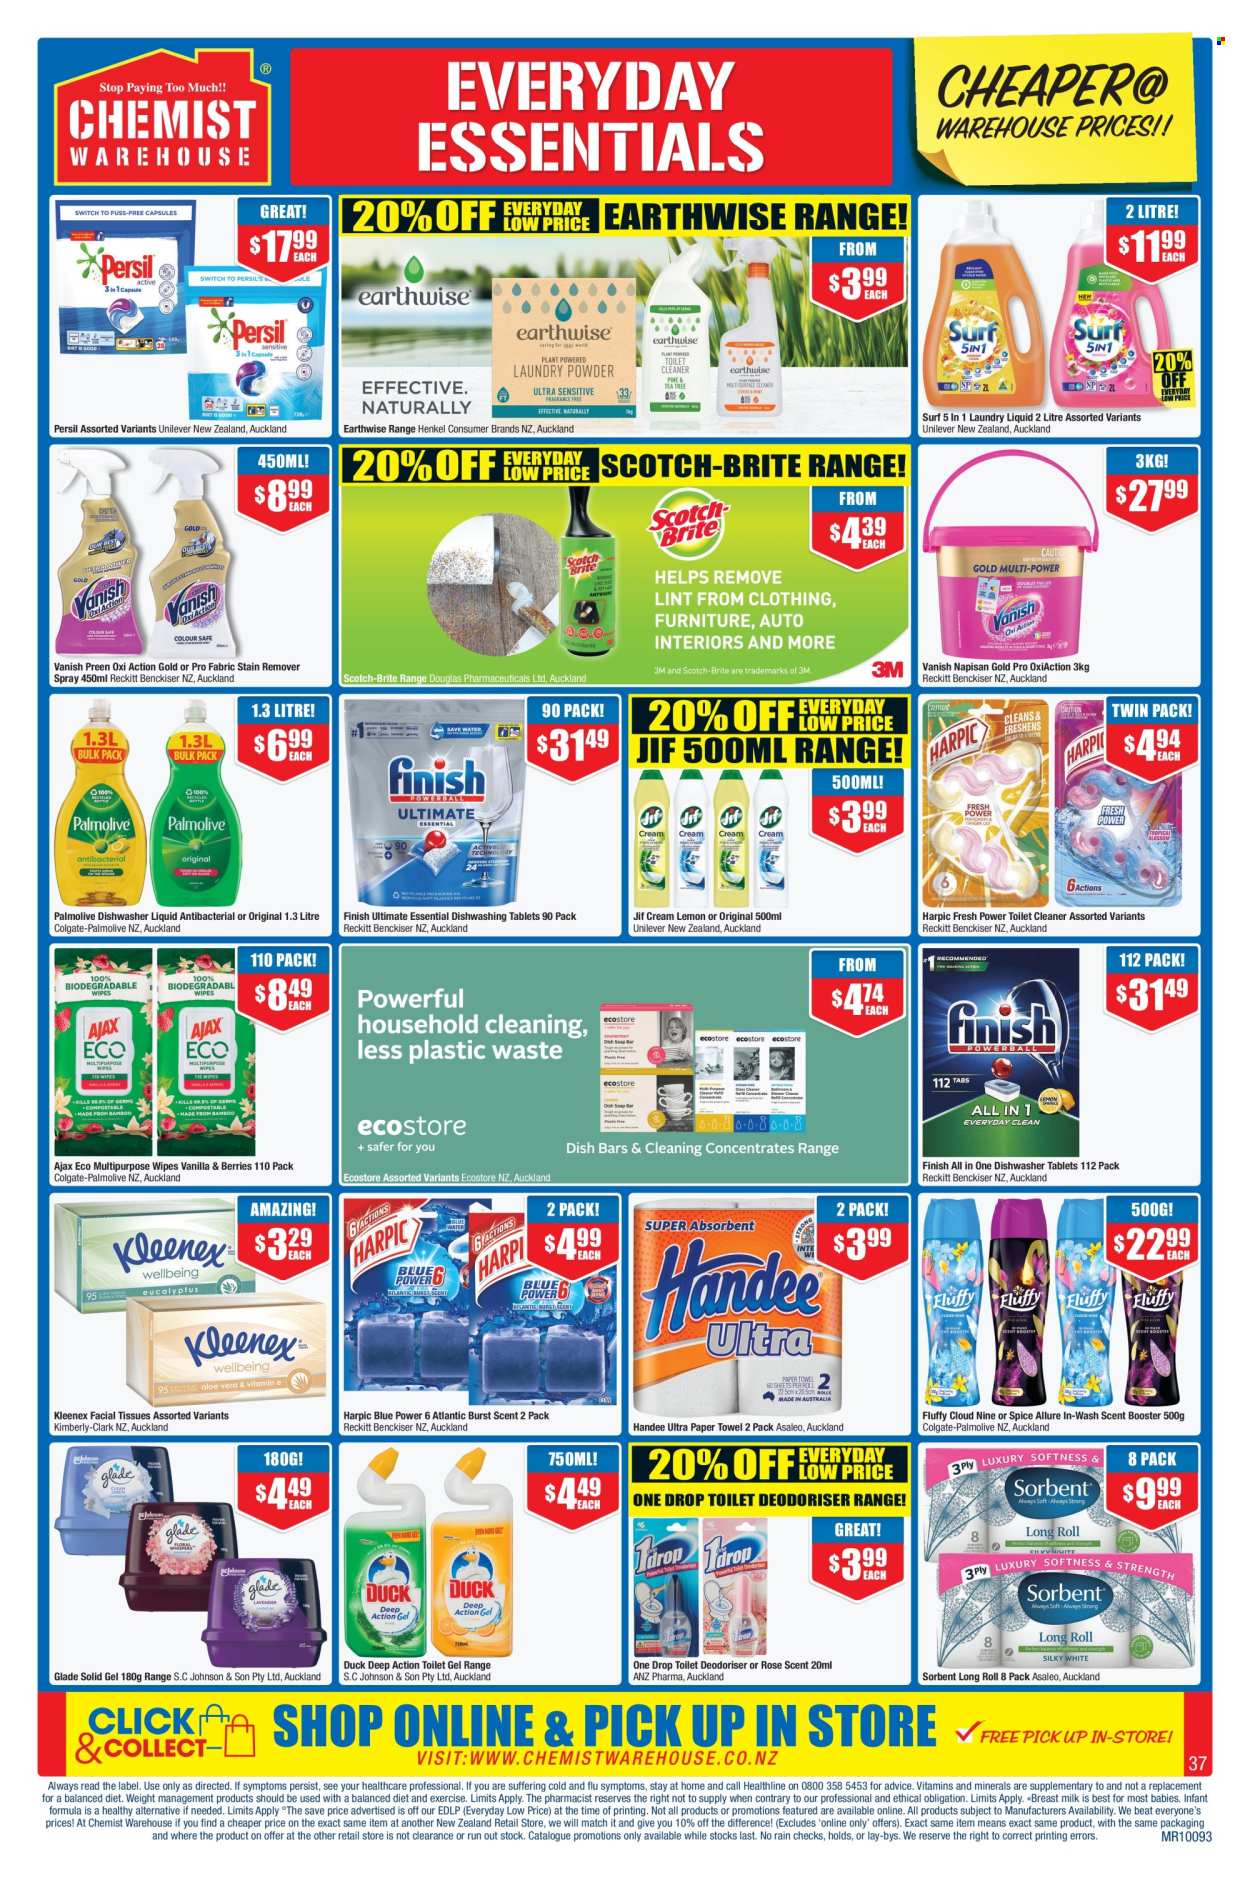 thumbnail - Chemist Warehouse mailer - 18.04.2024 - 12.05.2024 - Sales products - wipes, Johnson's, Kleenex, tissues, Handee, multipurpose wipes, kitchen towels, paper towels, cleaner, toilet cleaner, stain remover, Ajax Eco, Harpic, Jif, Vanish, Ajax, Persil, laundry detergent, Surf, scent booster, Finish Quantum Ultimate, Finish Allin1 Max, dishwasher tablets, Palmolive, Colgate, facial tissues, dietary supplement, vitamins. Page 37.